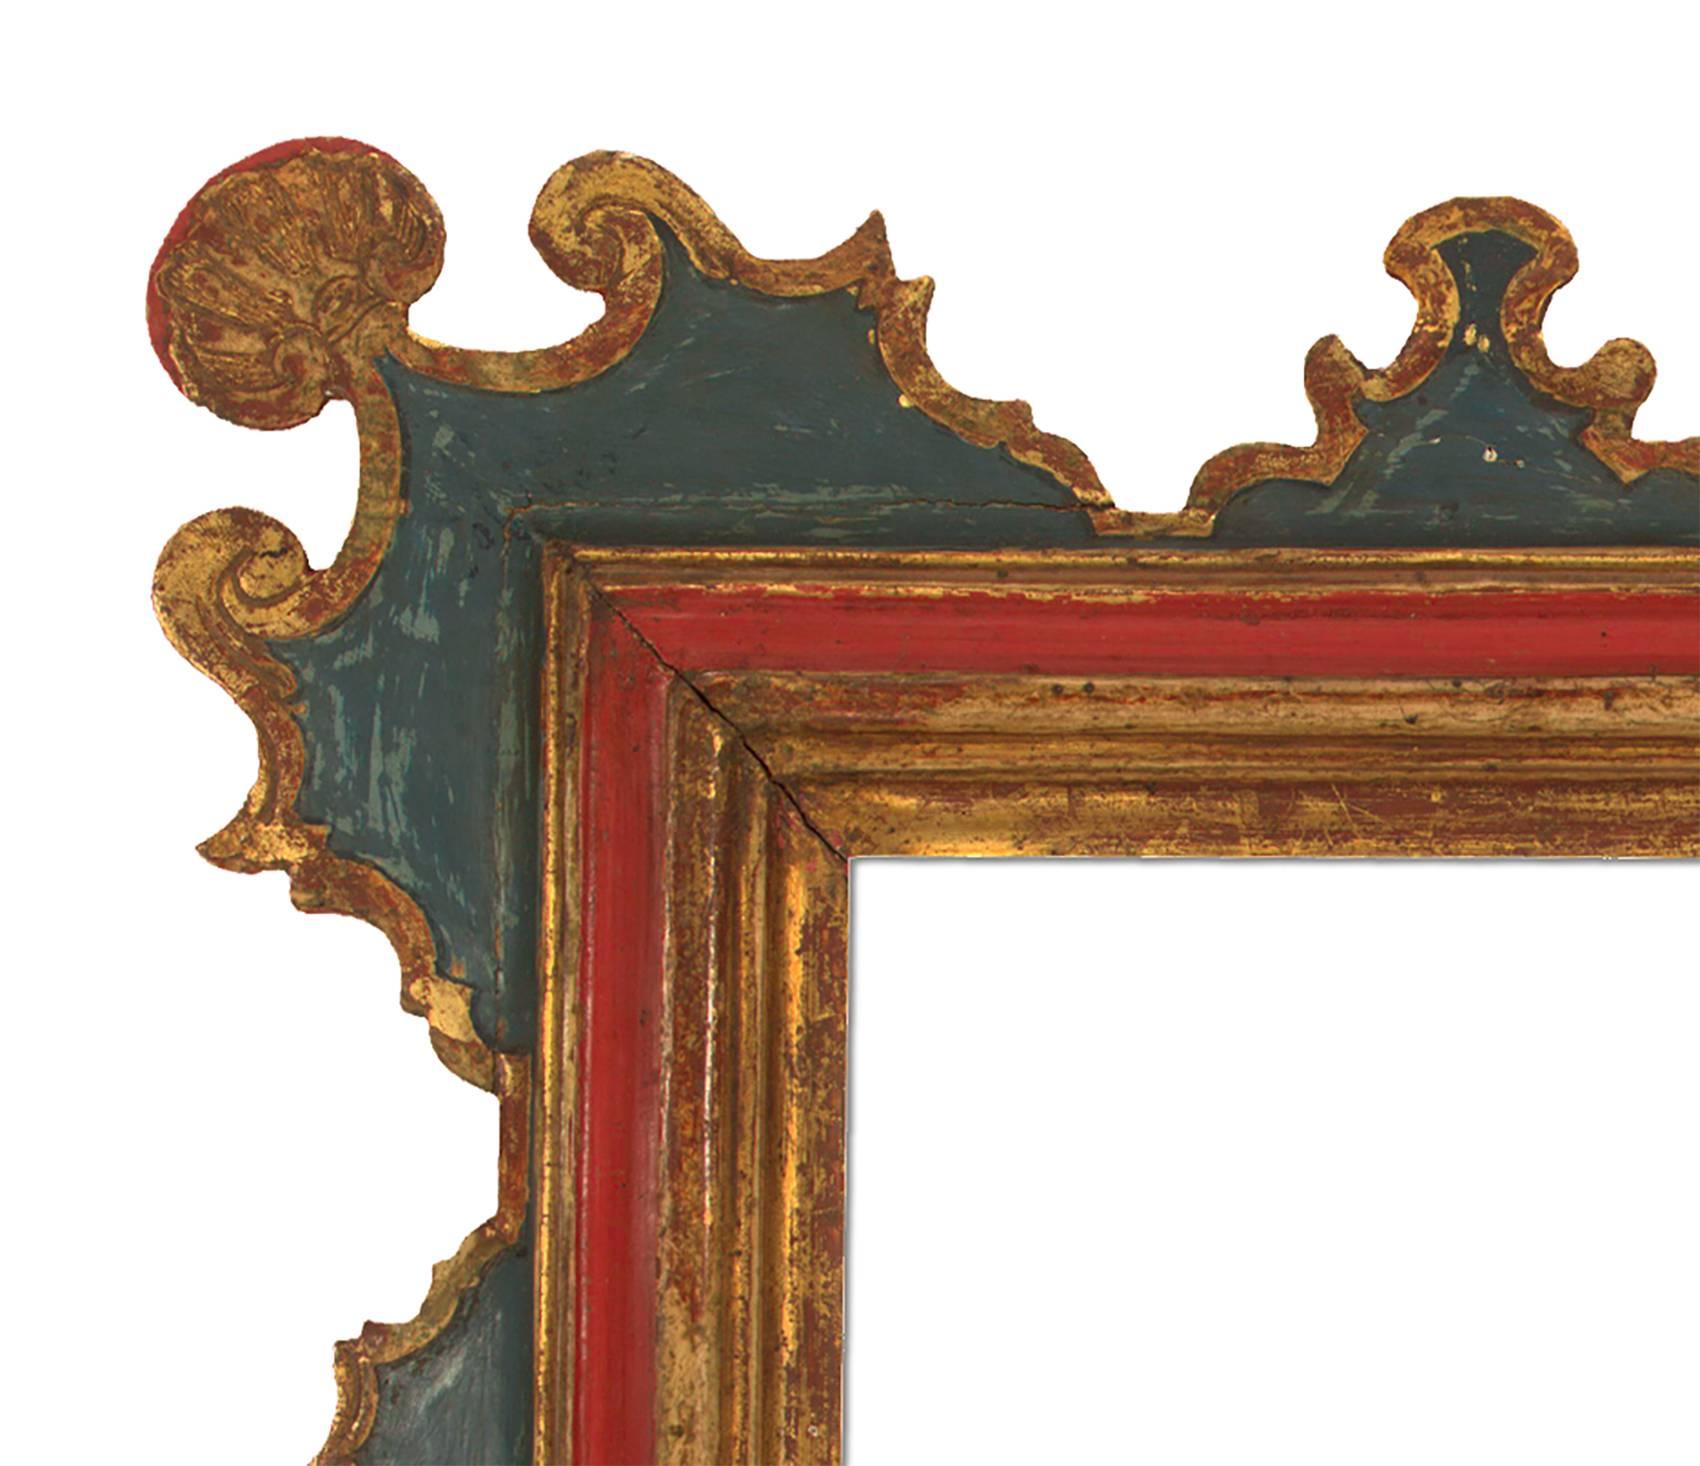 Carved and gilt mirror in the 19th century Spanish style, hand-painted and patinated. Measures: 20